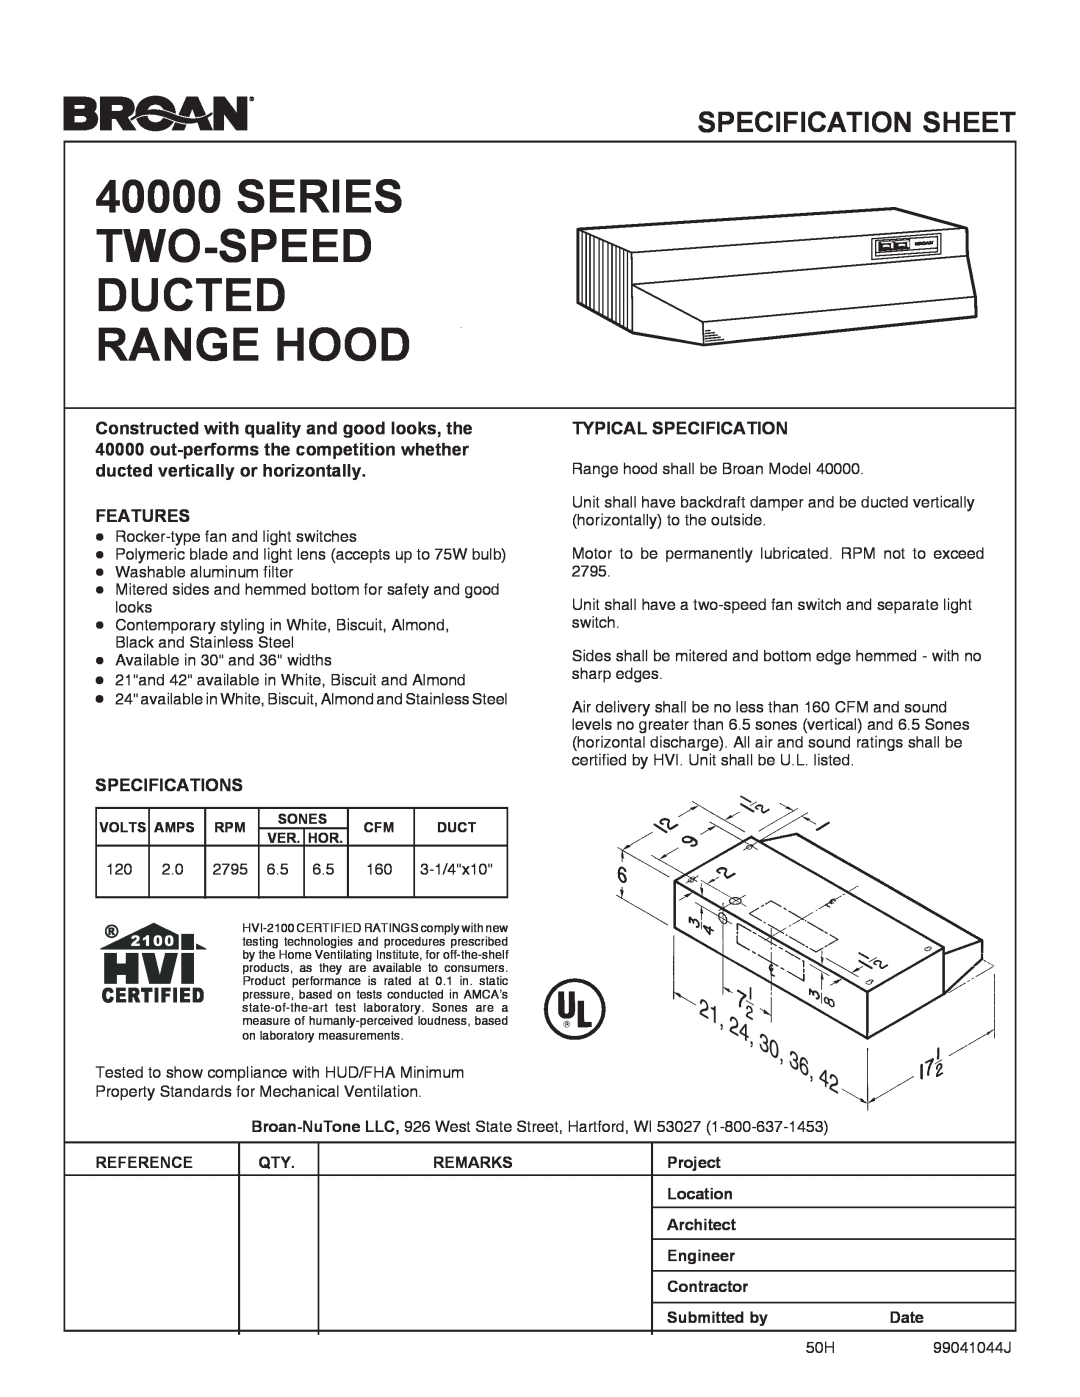 Broan 40000 Series specifications Series Two-Speed Ducted Range Hood, Specification Sheet, Features, Specifications, 2795 